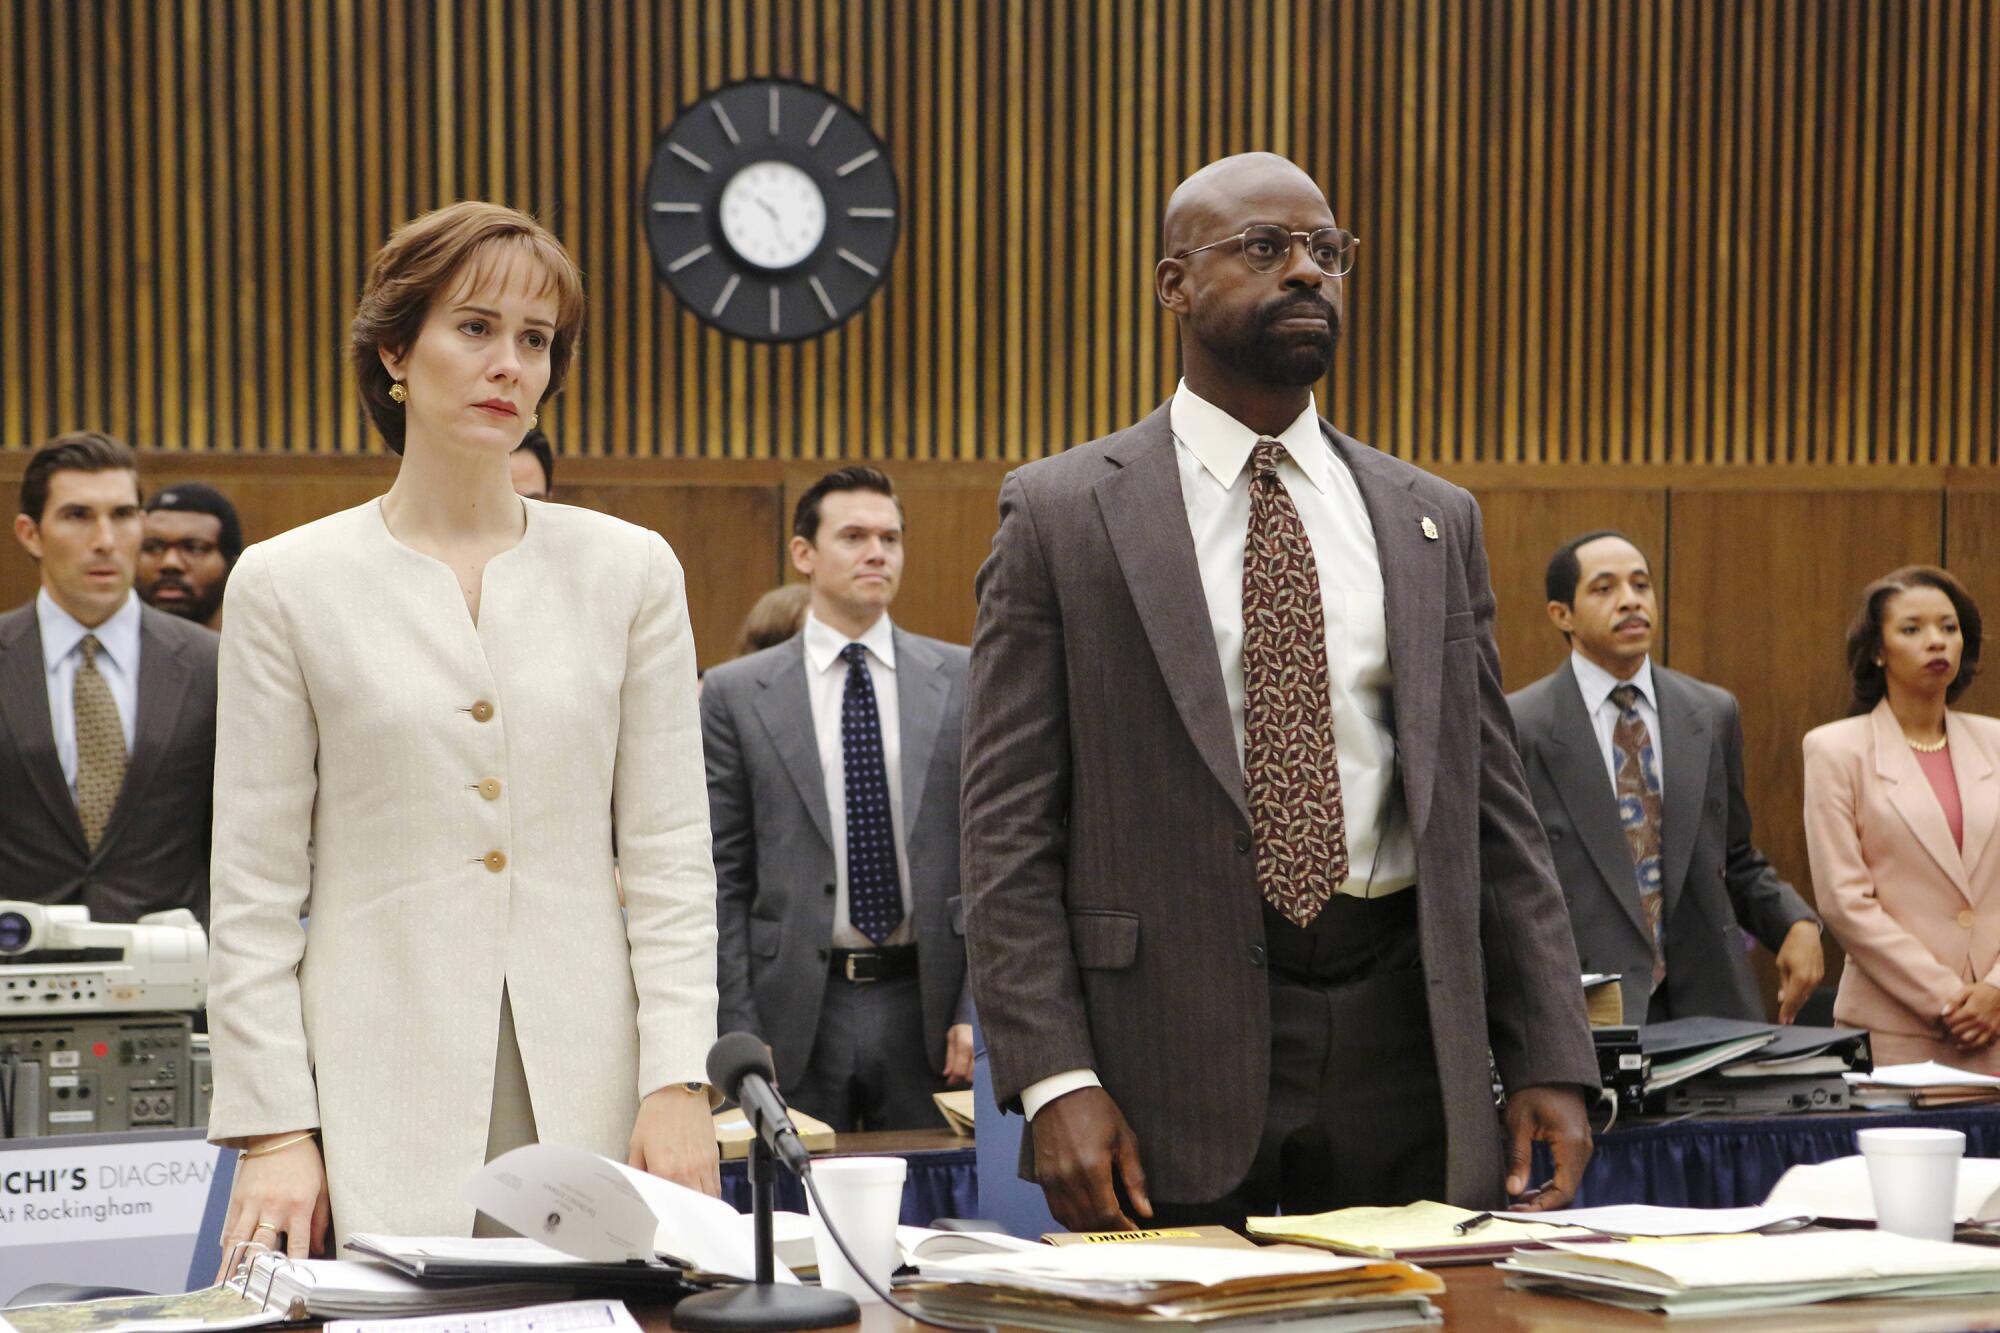 Actors portray two prosecutors standing in court in the 1990s.